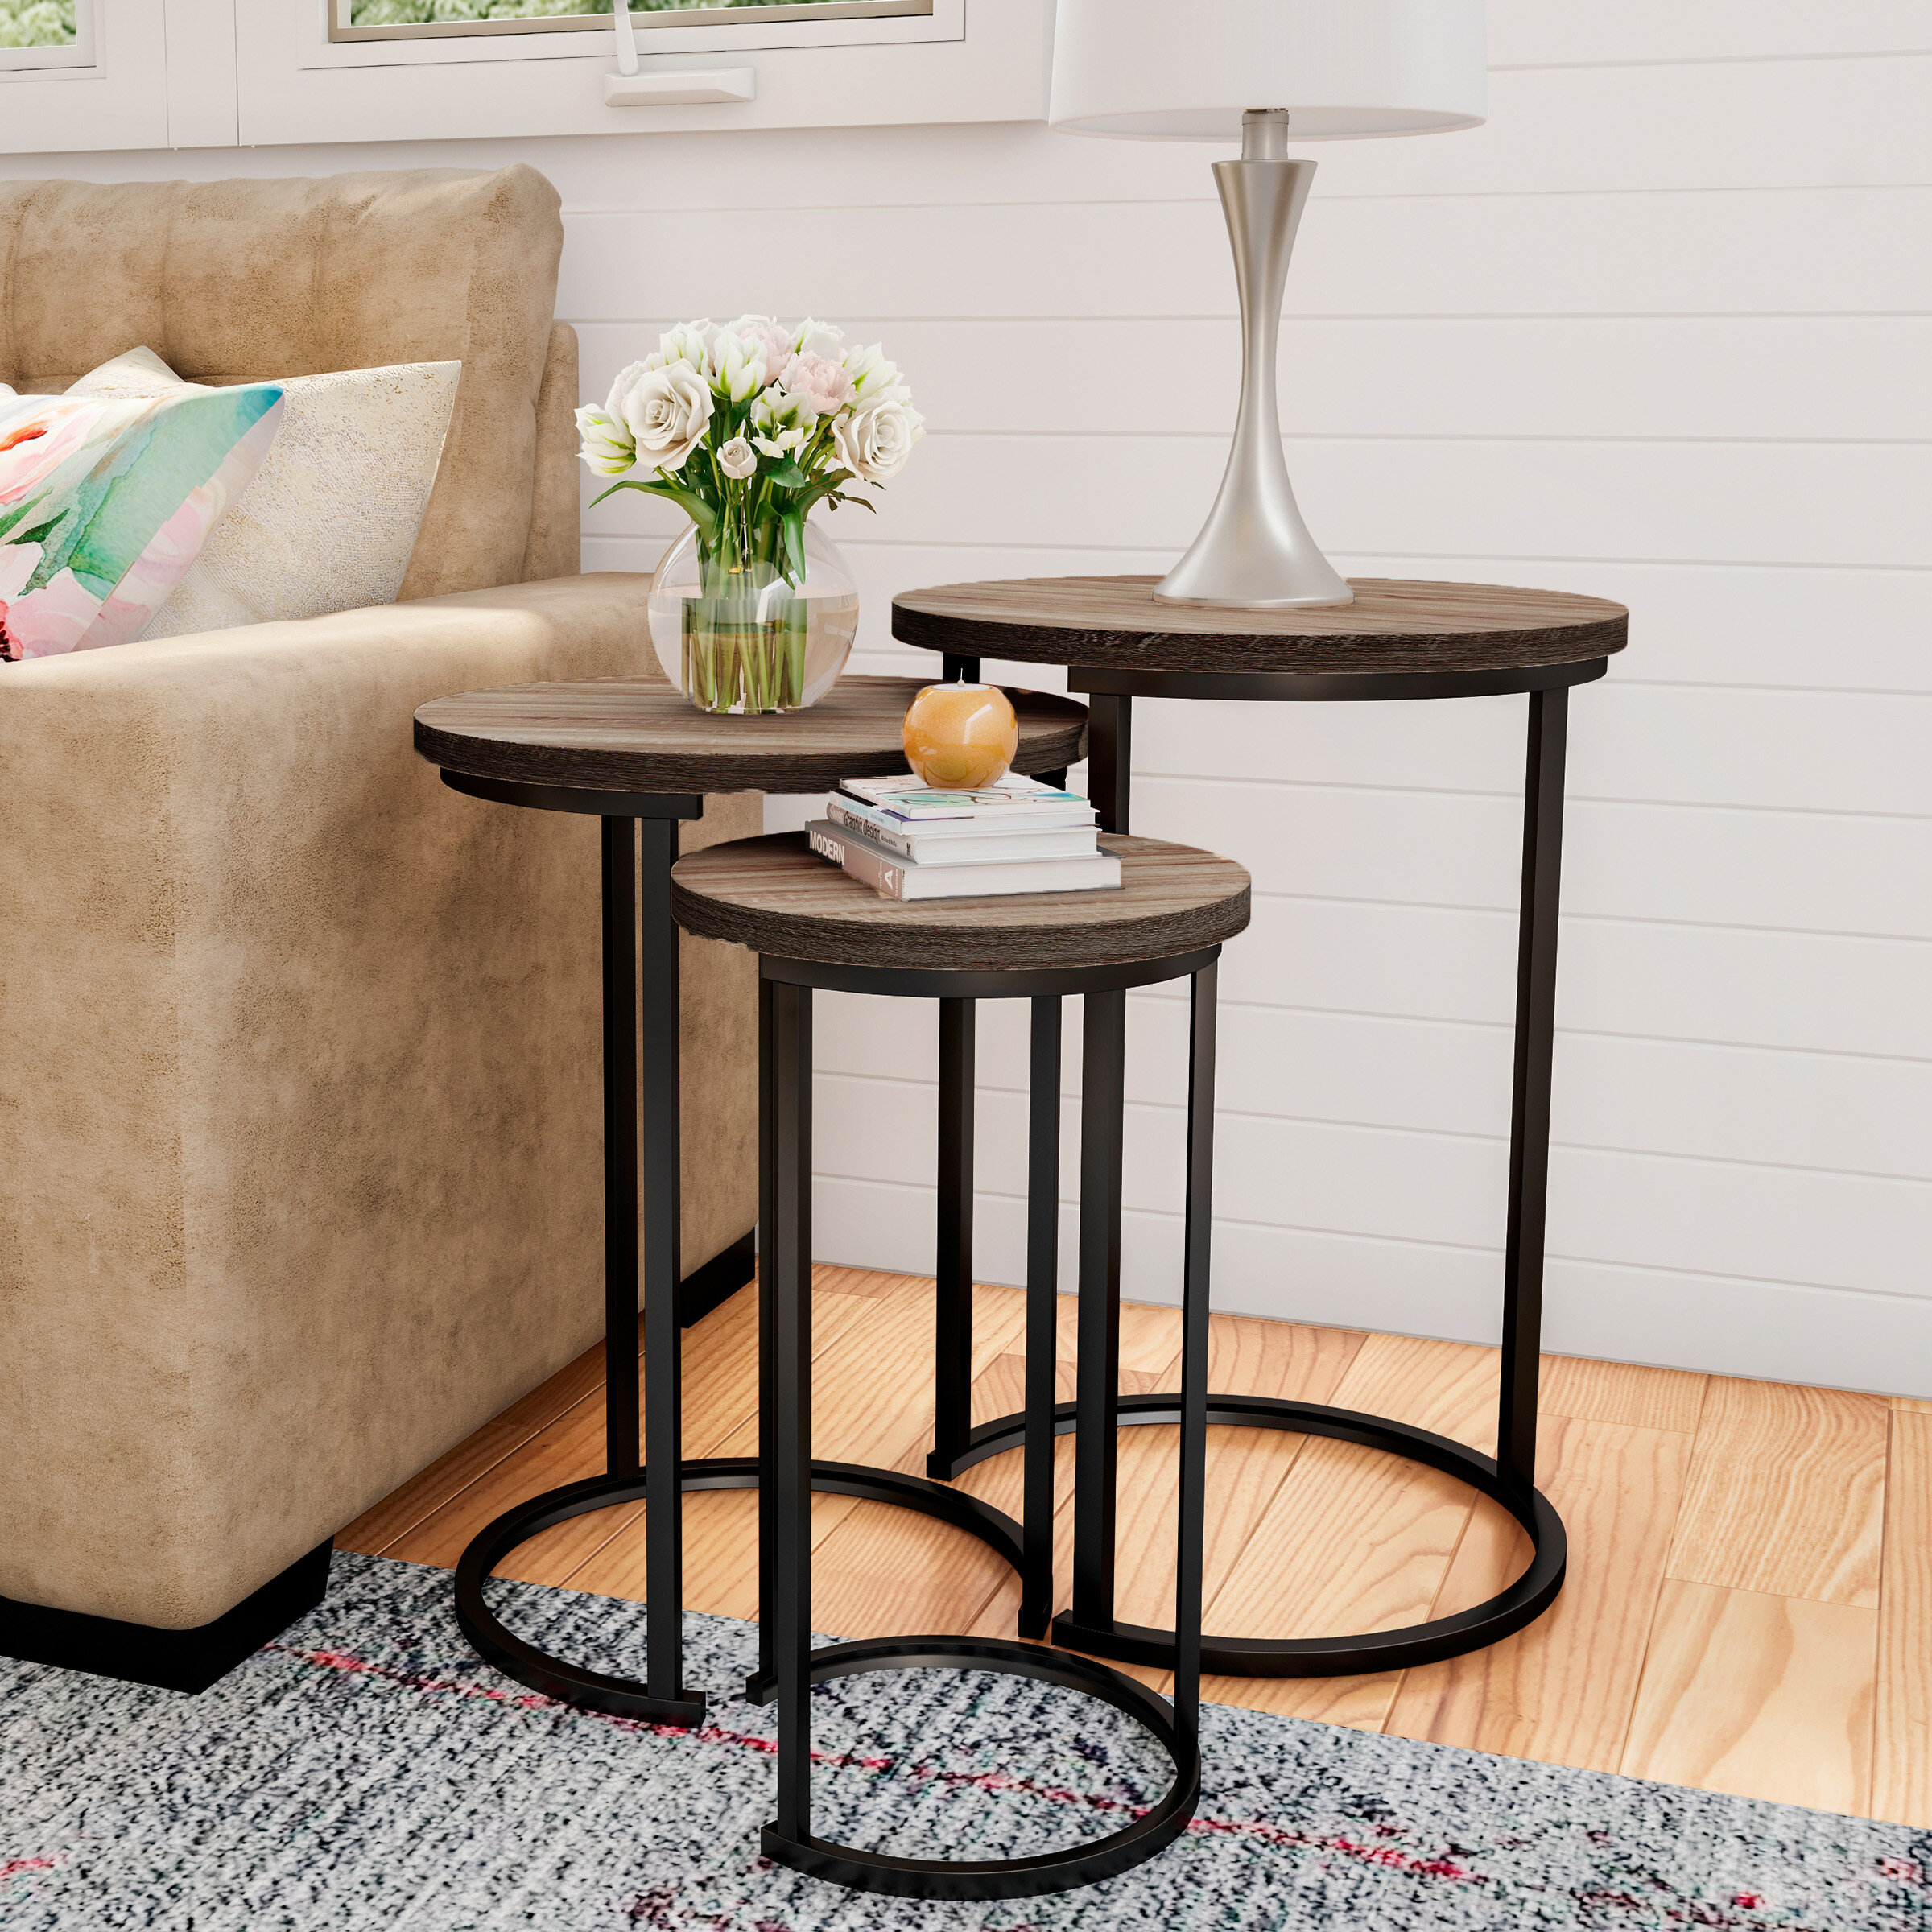 Nesting Tables Union Rustic Caire Frame Nesting Tables & Reviews | Wayfair